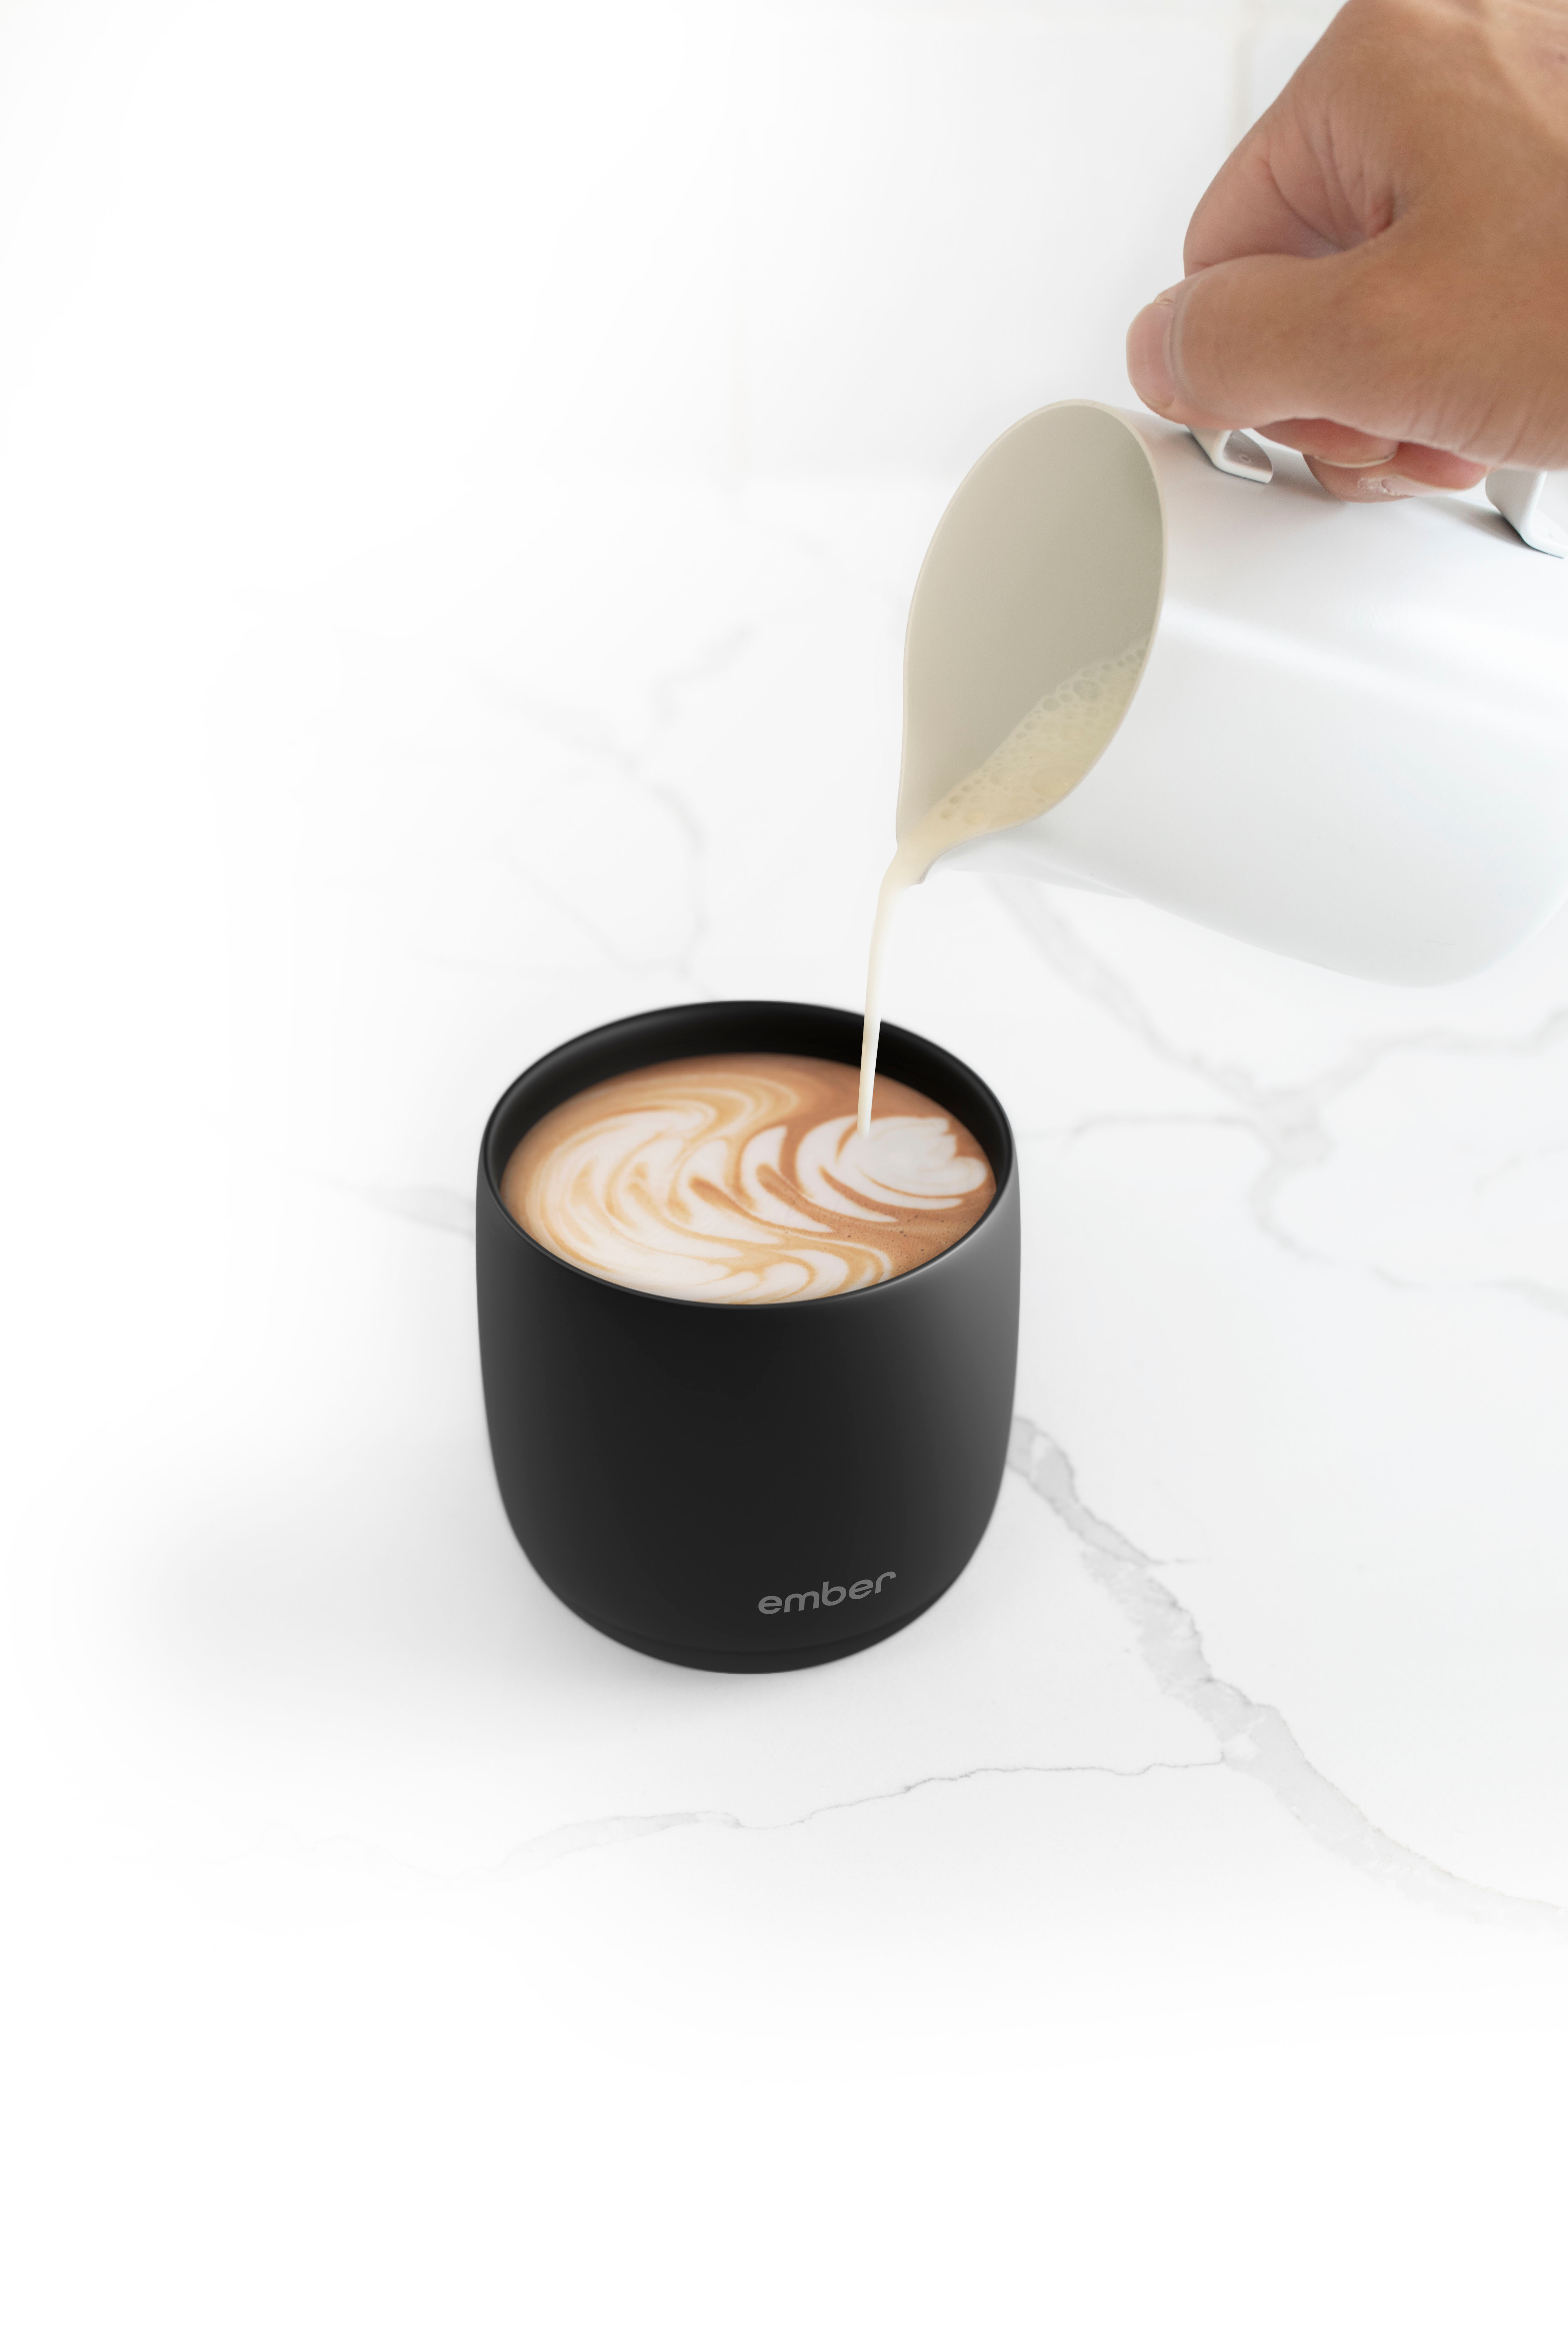 Ember Cup Review: Keeping 6 Ounces of Espresso Hot Isn't Cheap